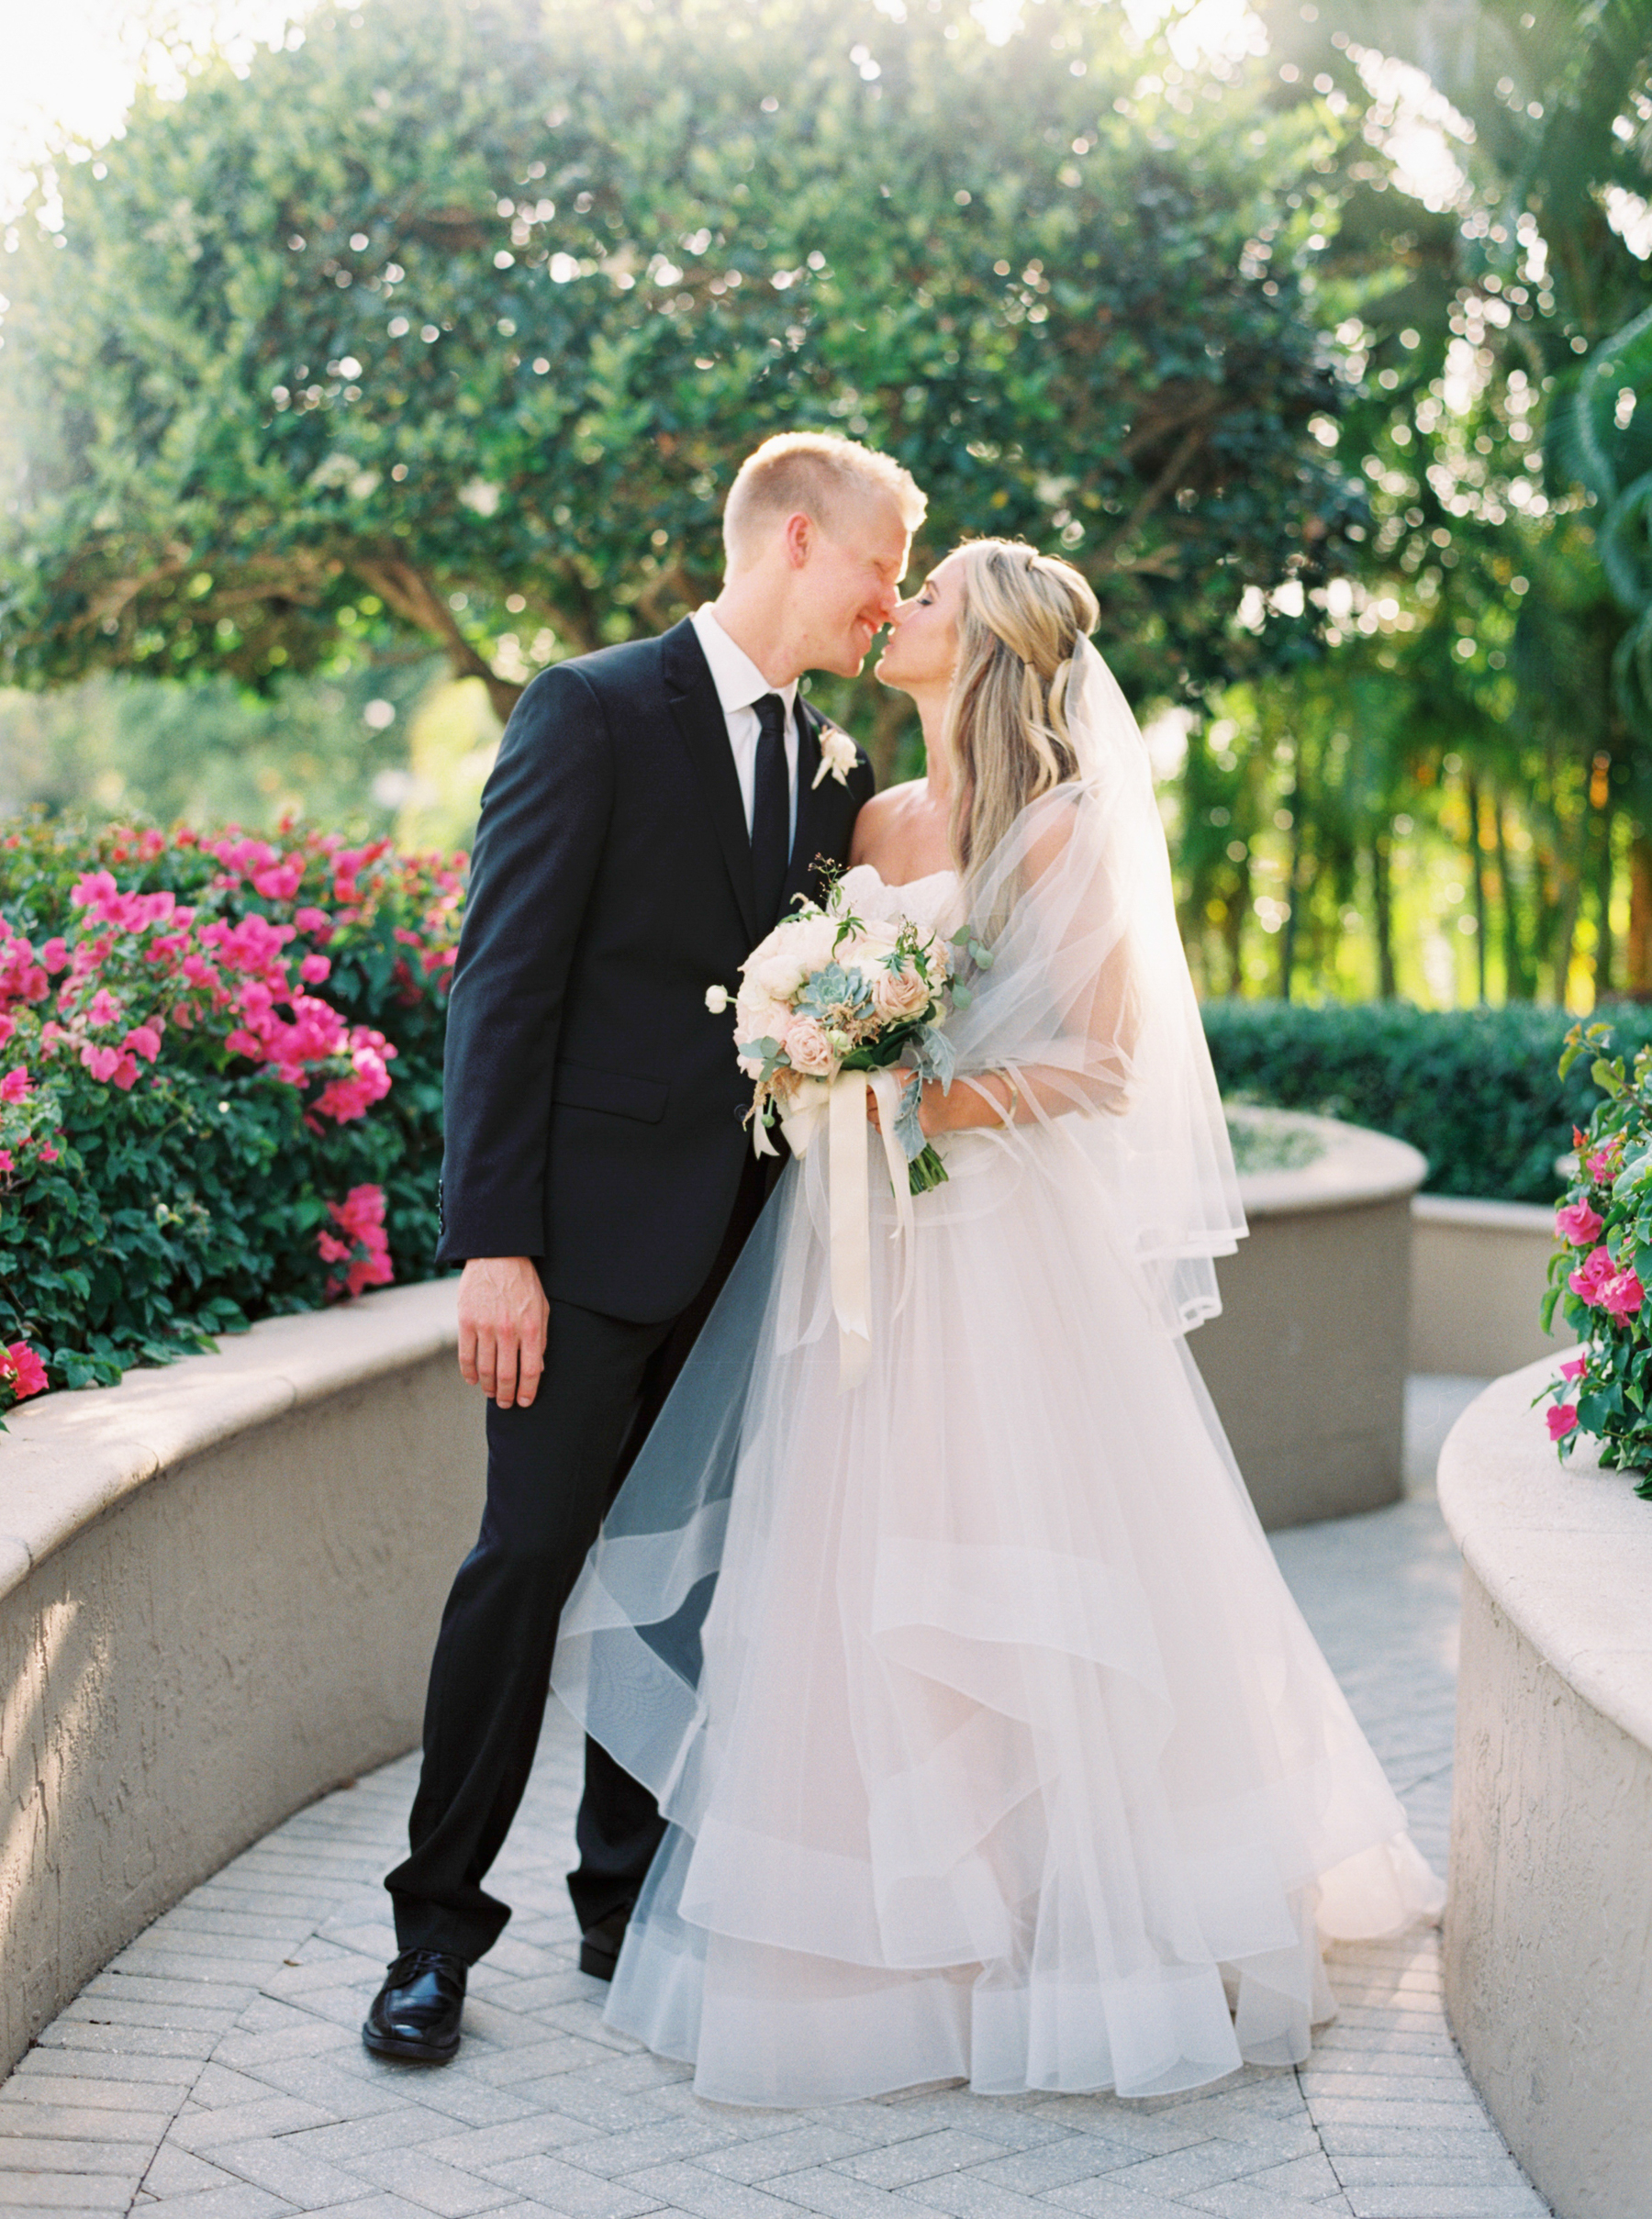 bride and groom touches noses in garden of pink flowers at Naples Florida Wedding 